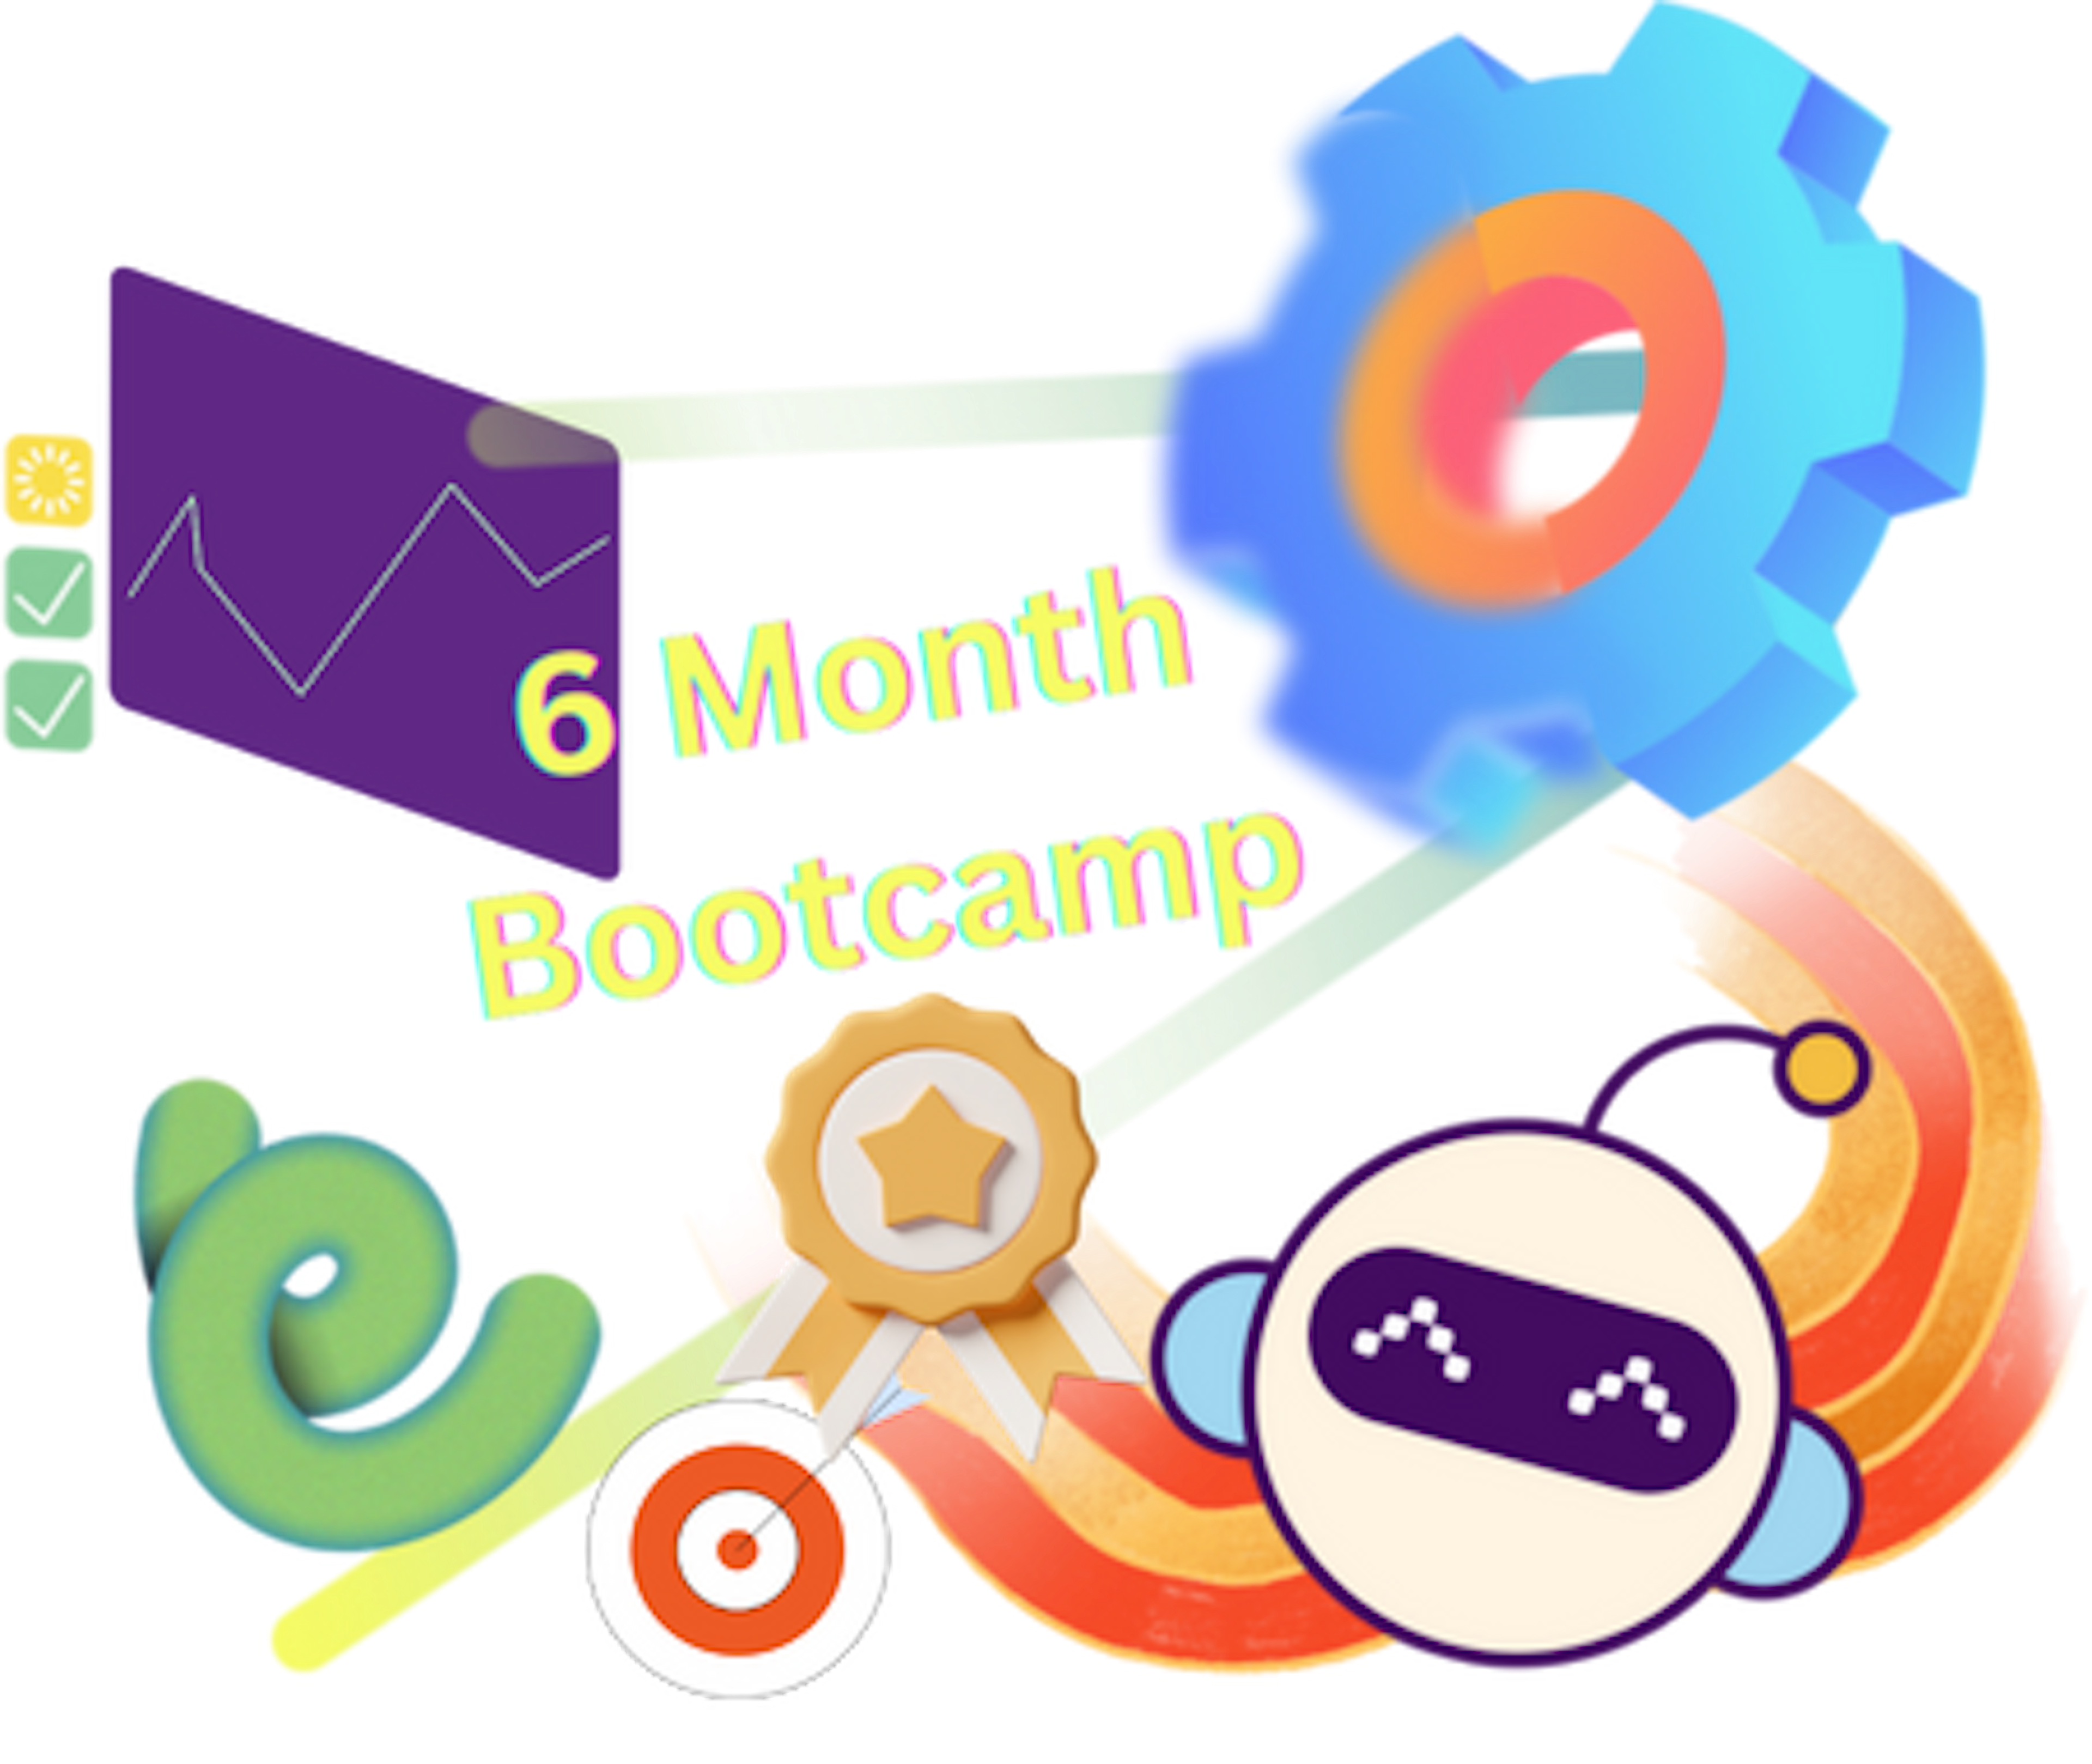 Bootcamp6Month